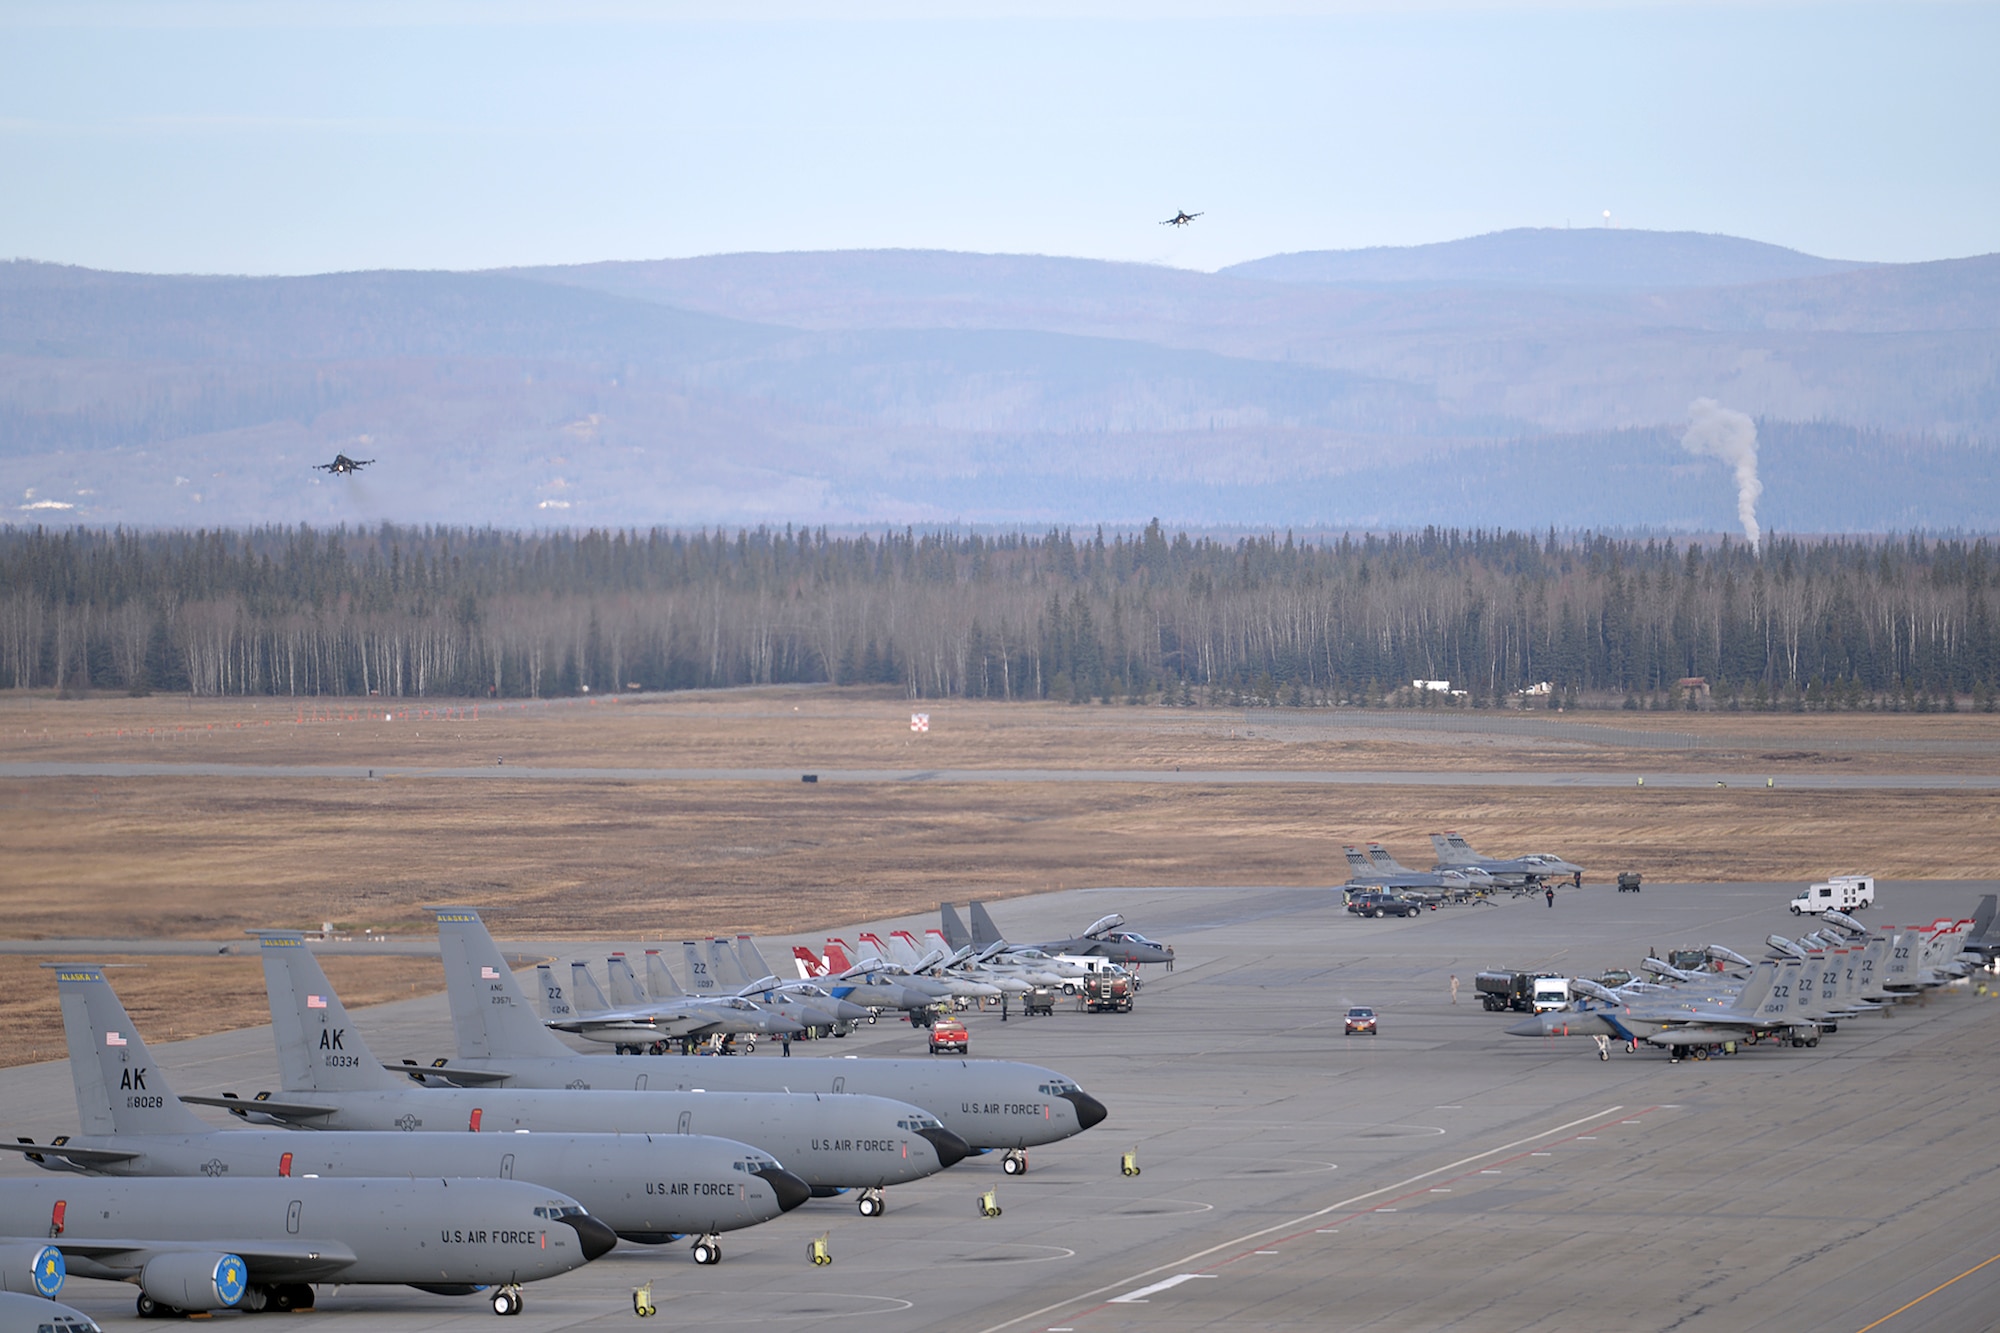 A variety of units aircraft and personnel gather in their ramp space as a pair of F-16 Fighting Falcons prepare to land at Eielson Air Force Base, Alaska, Oct. 10, 2016, after the first Red Flag-Alaska 17-1 combat training mission. Red Flag-Alaska is a Pacific Air Forces commander-directed field training exercise and is vital to maintaining peace and stability in the Indo-Asia-Pacific region. The F-16s are assigned to the 36th Fighter Squadron at Osan Air Base, South Korea. (U.S. Air Force photo/Master Sgt. Karen J. Tomasik)